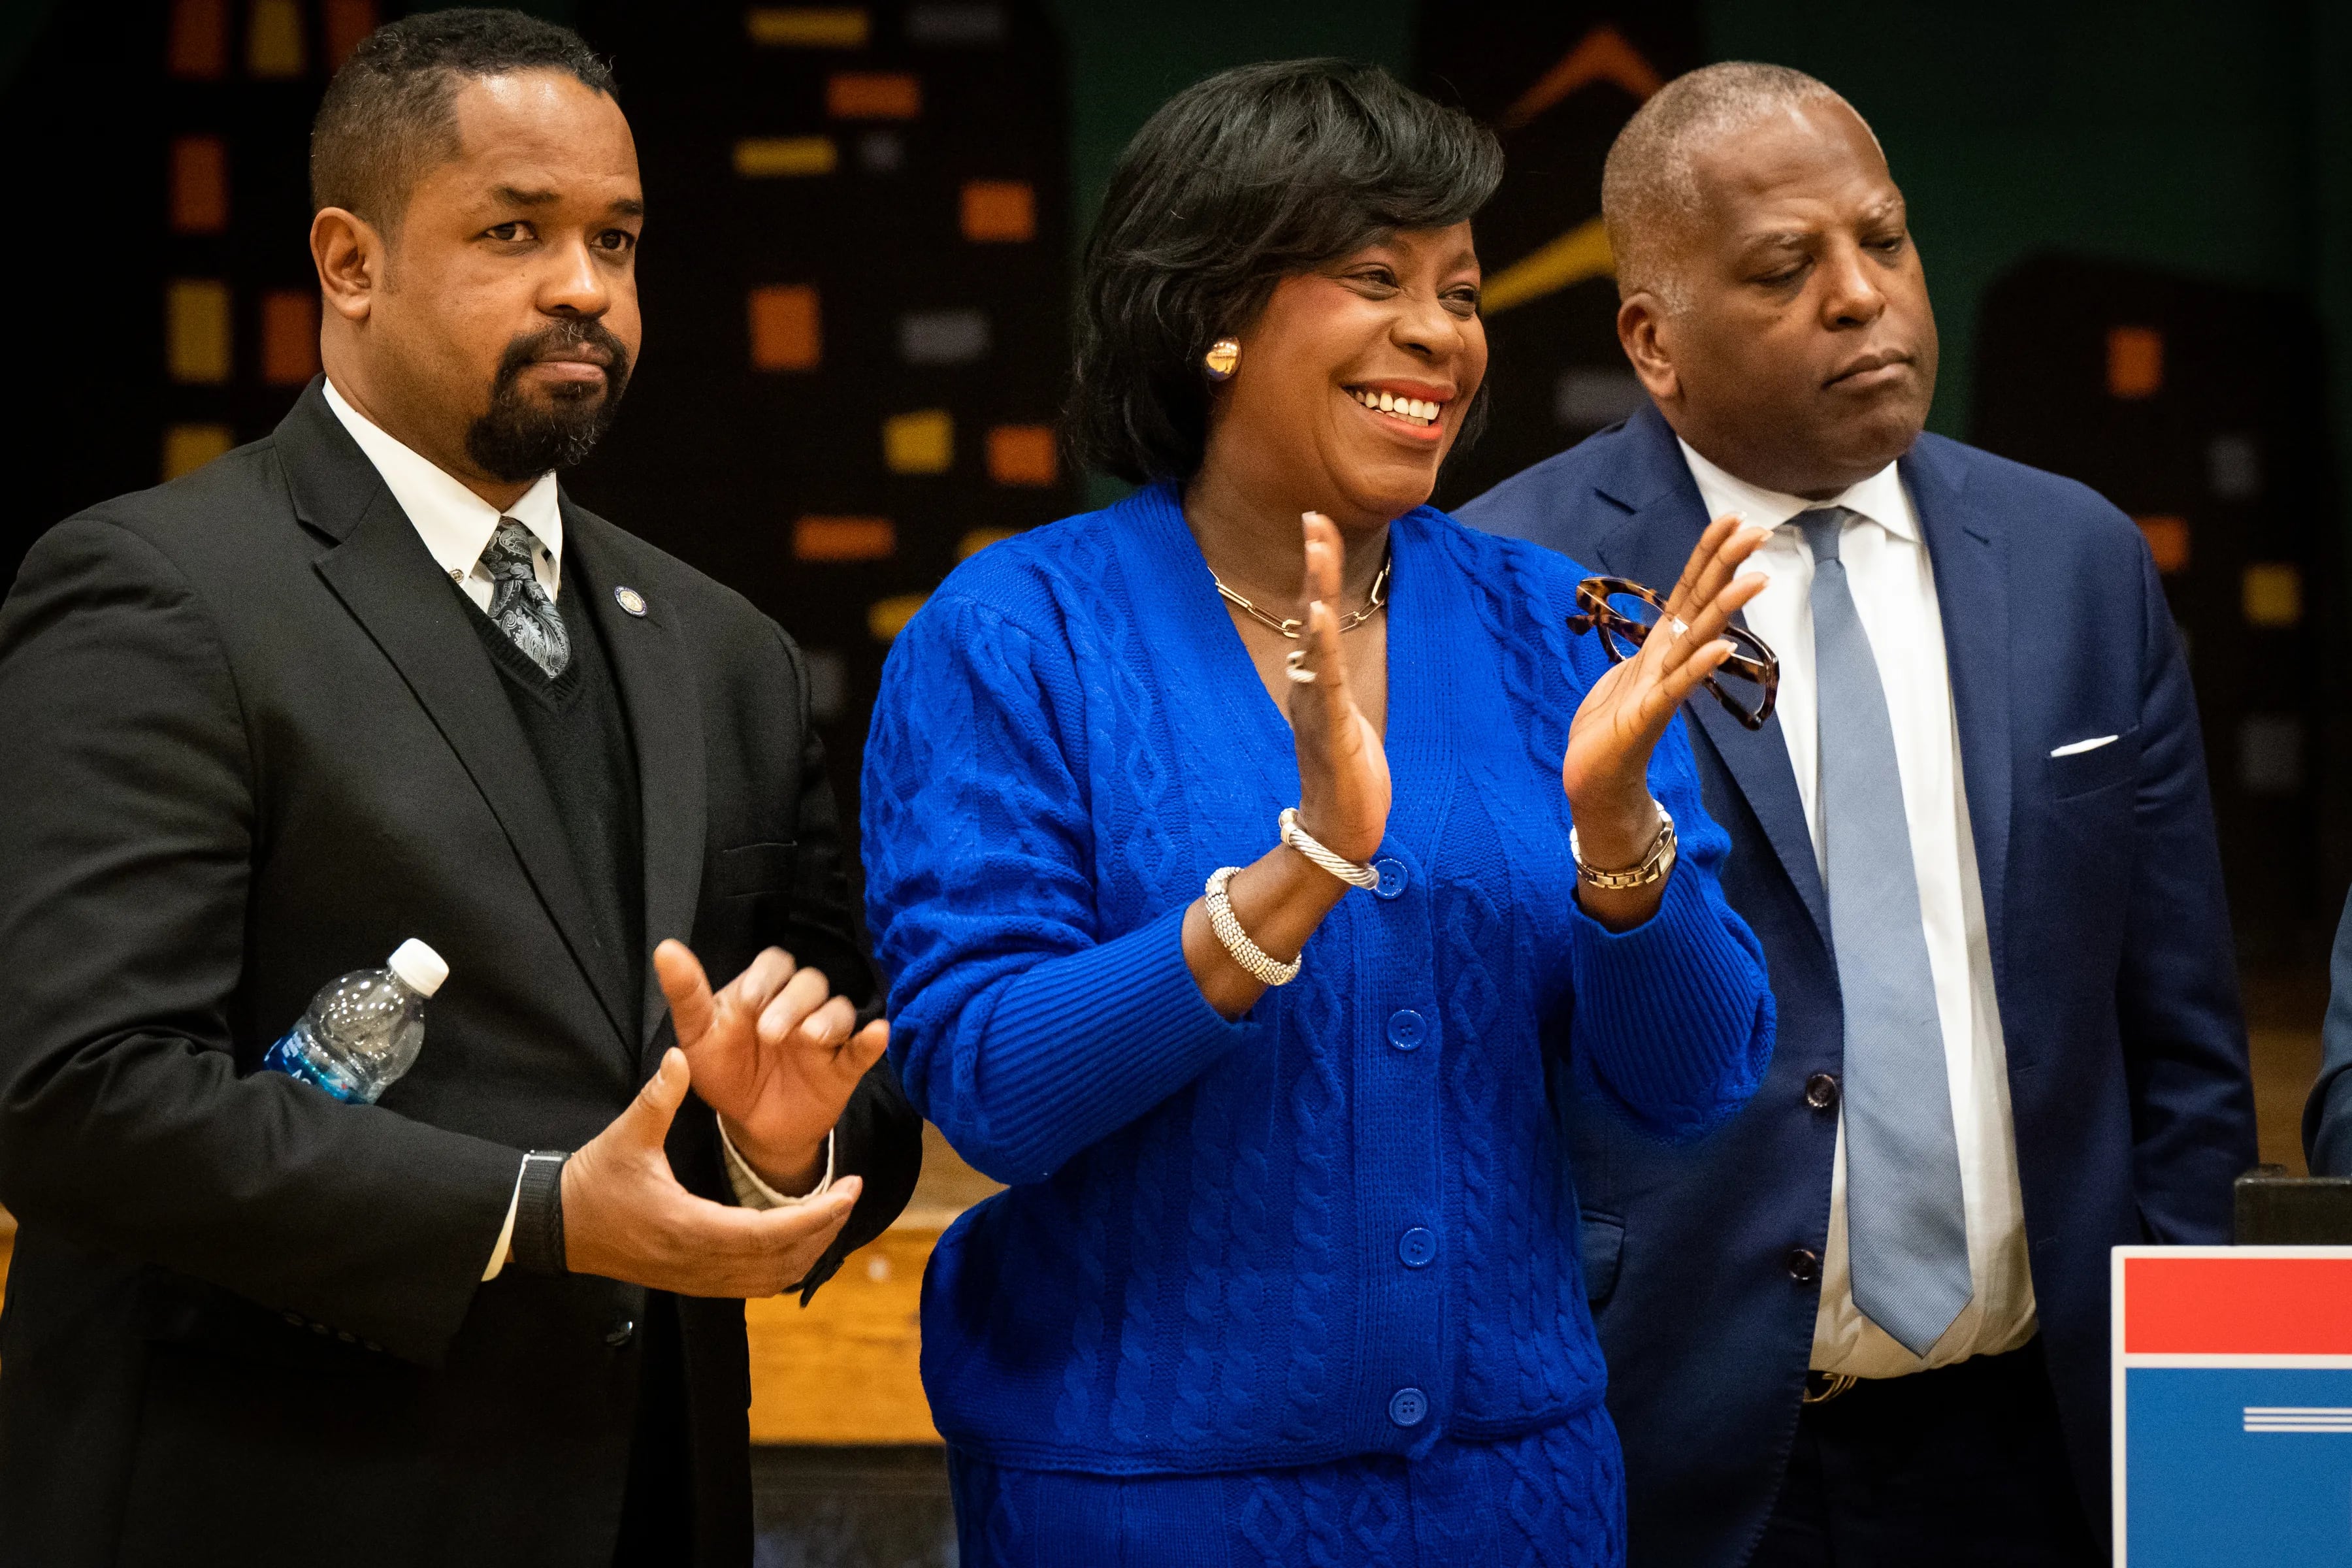 (Left to Right) Senator Sharif Street, Mayor Cherelle Parker, and Stephen Benjamin, White House Senior Advisor to the President and Director of Public Engagement, shown here during a press conference to announce a federal grant to expand broadband service in Philadelphia, at the Martin Luther King Recreation Center, in Philadelphia, Friday, March 1, 2024.